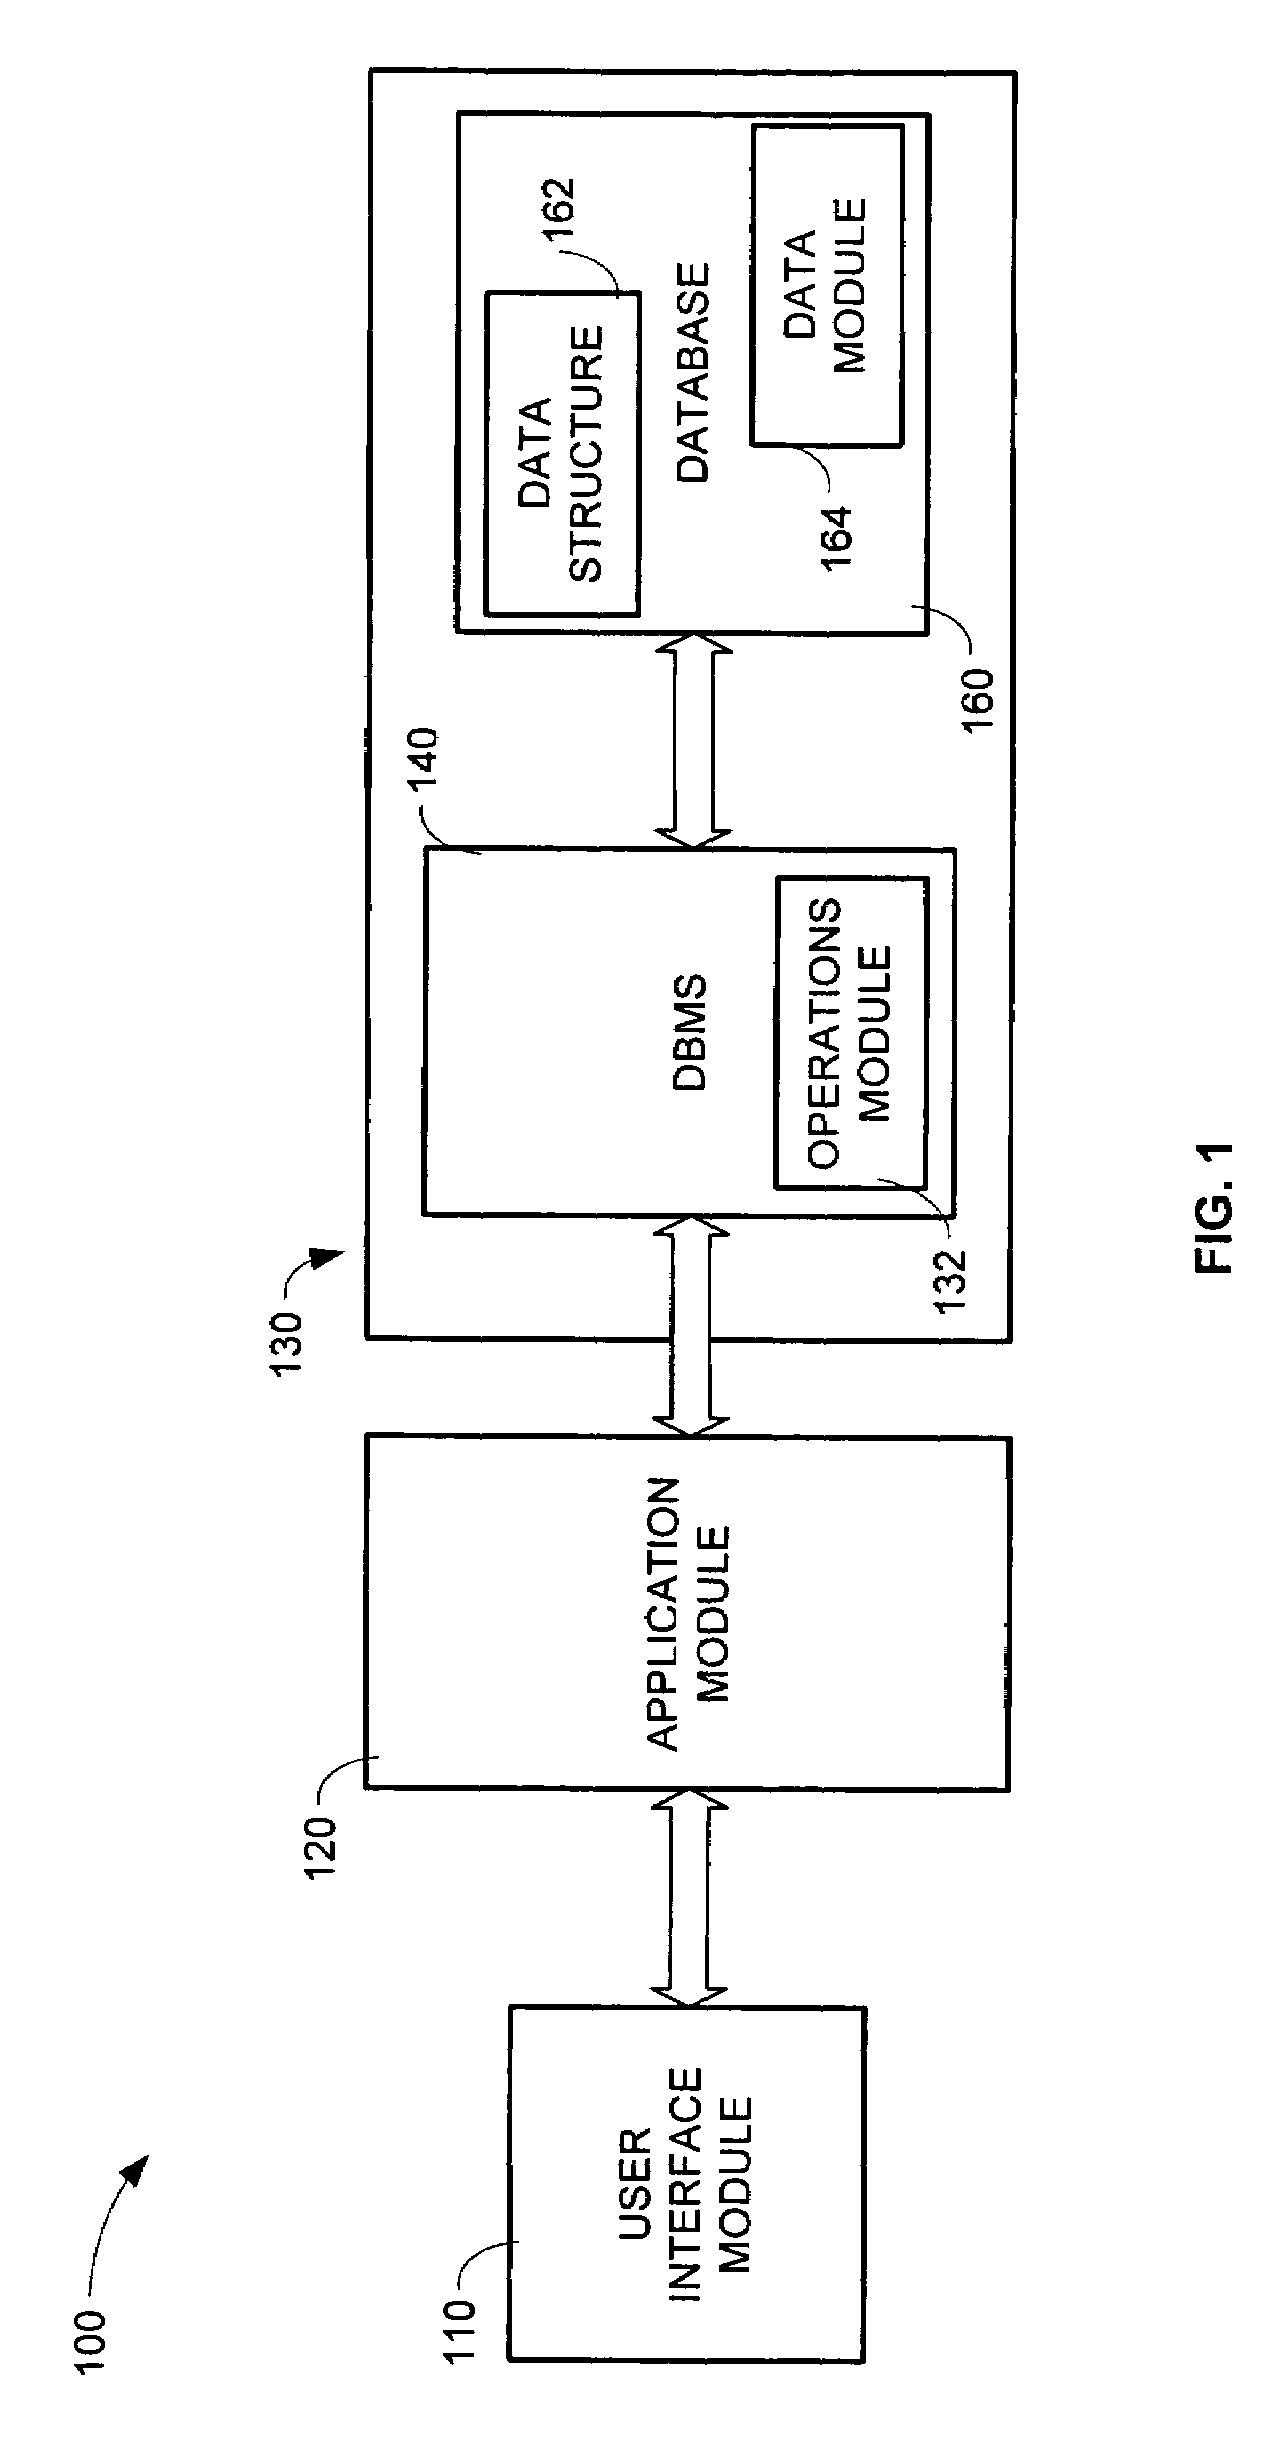 Account level participation for underwriting components